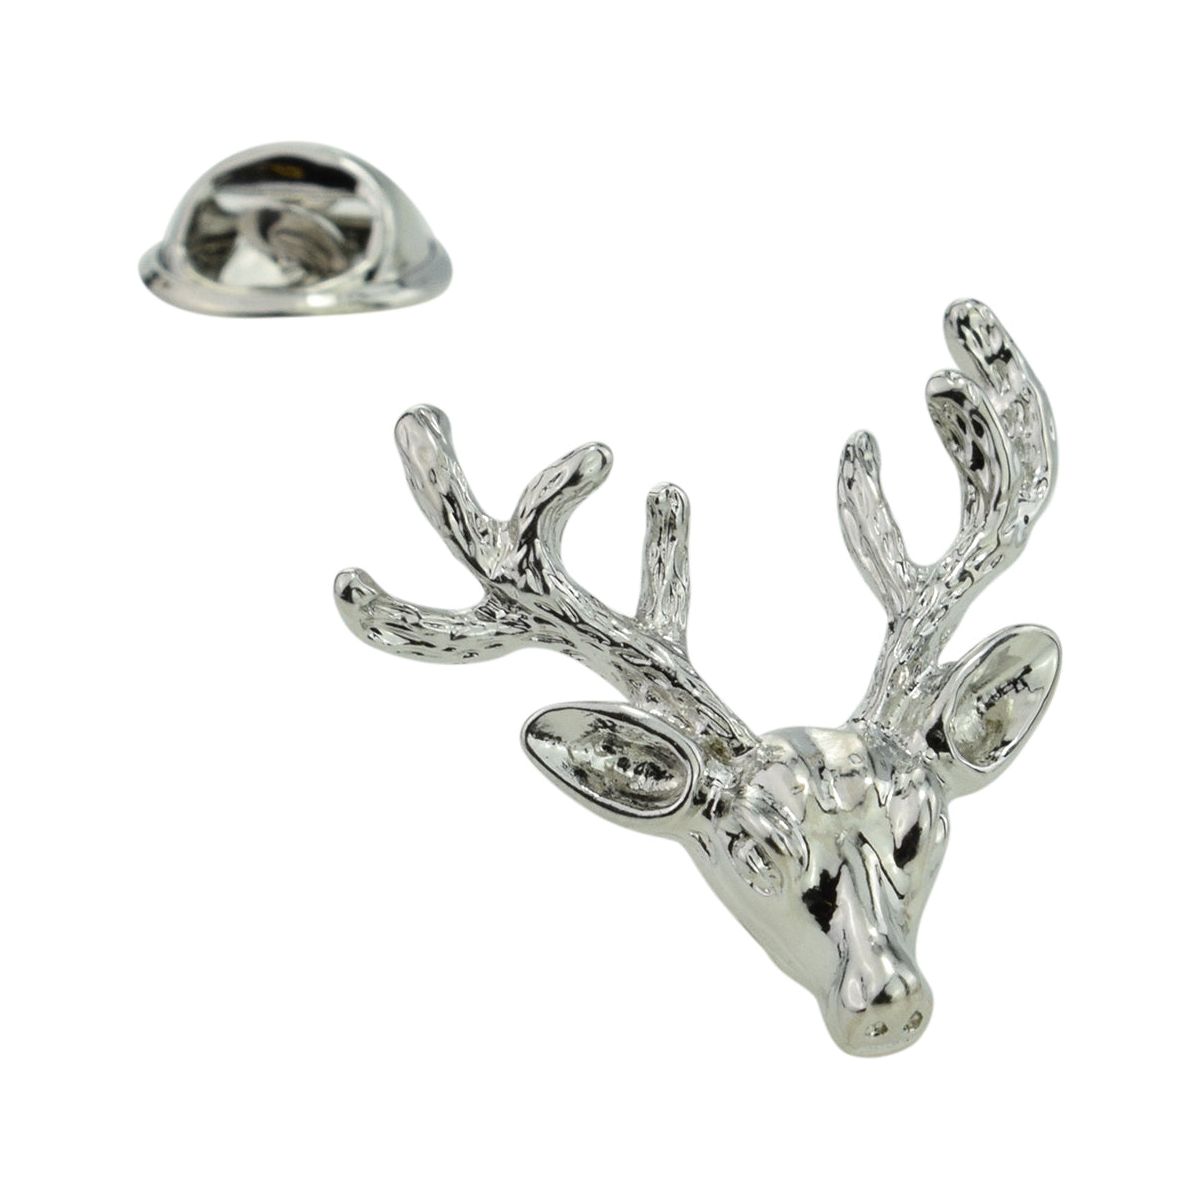 Stags Head with Full Antlers Lapel Pin Badge - Ashton and Finch